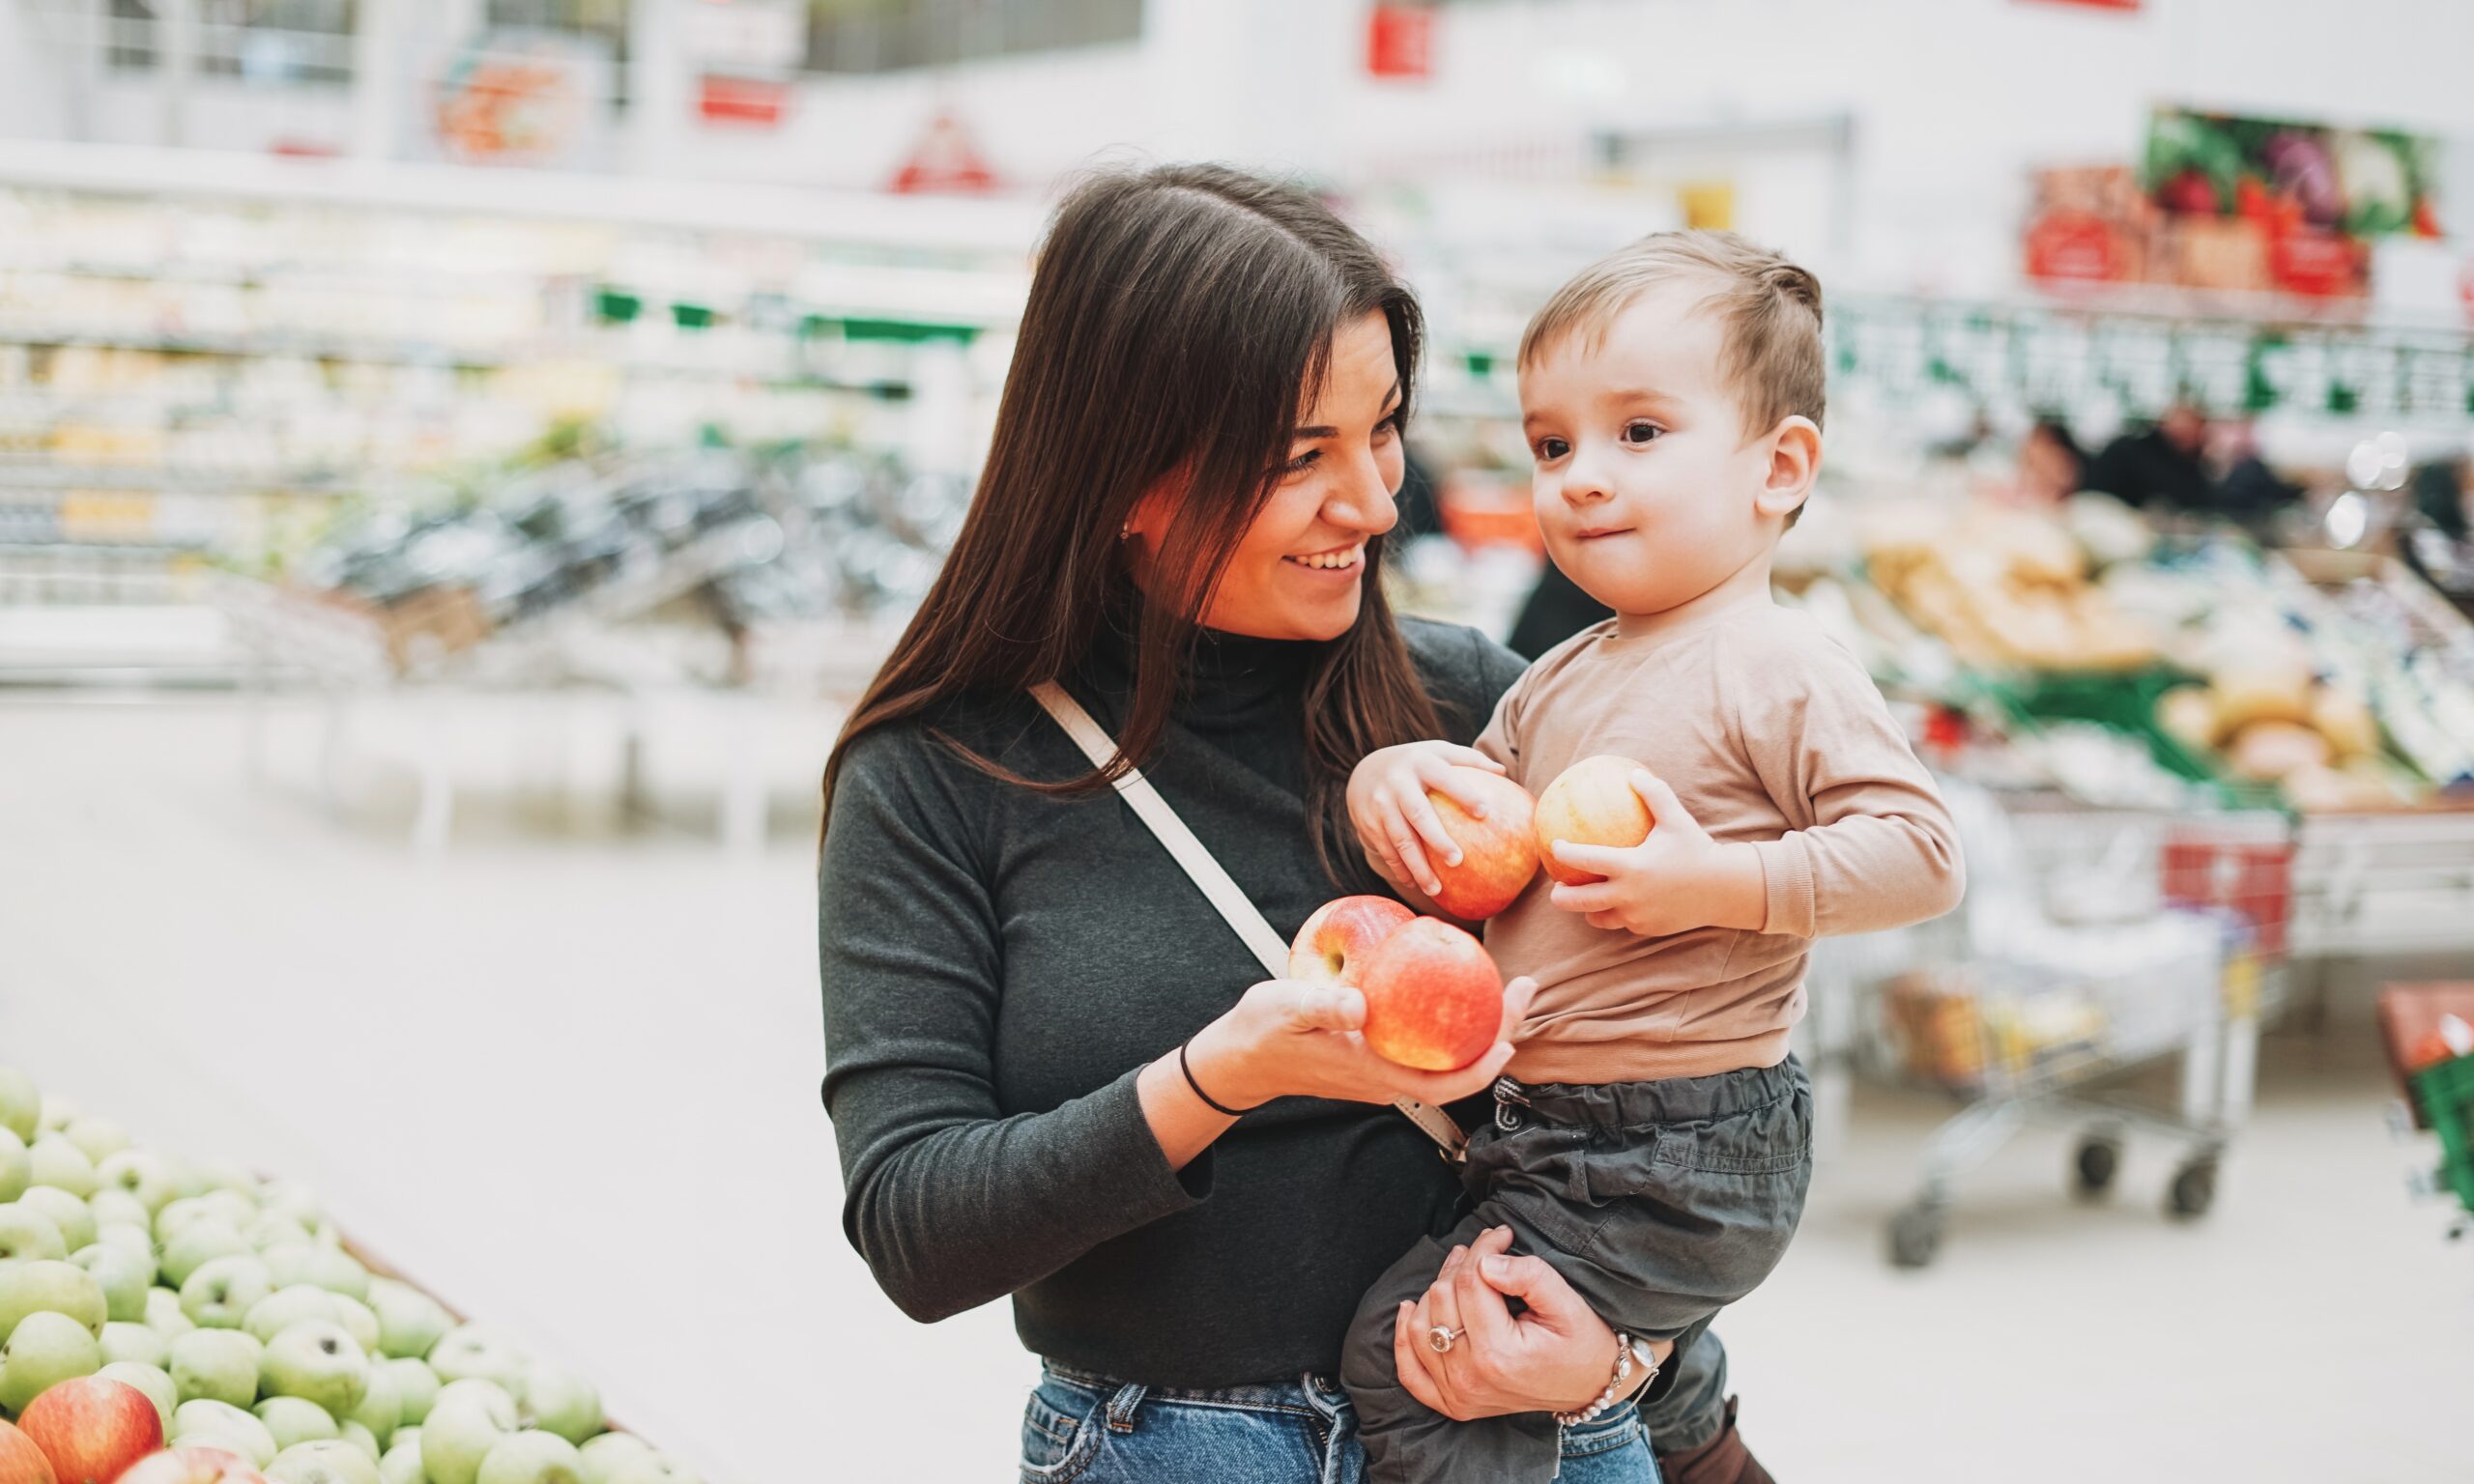 A mom with long brown hair holds a toddler in the produce section of a grocery store. They are both holding peaches.